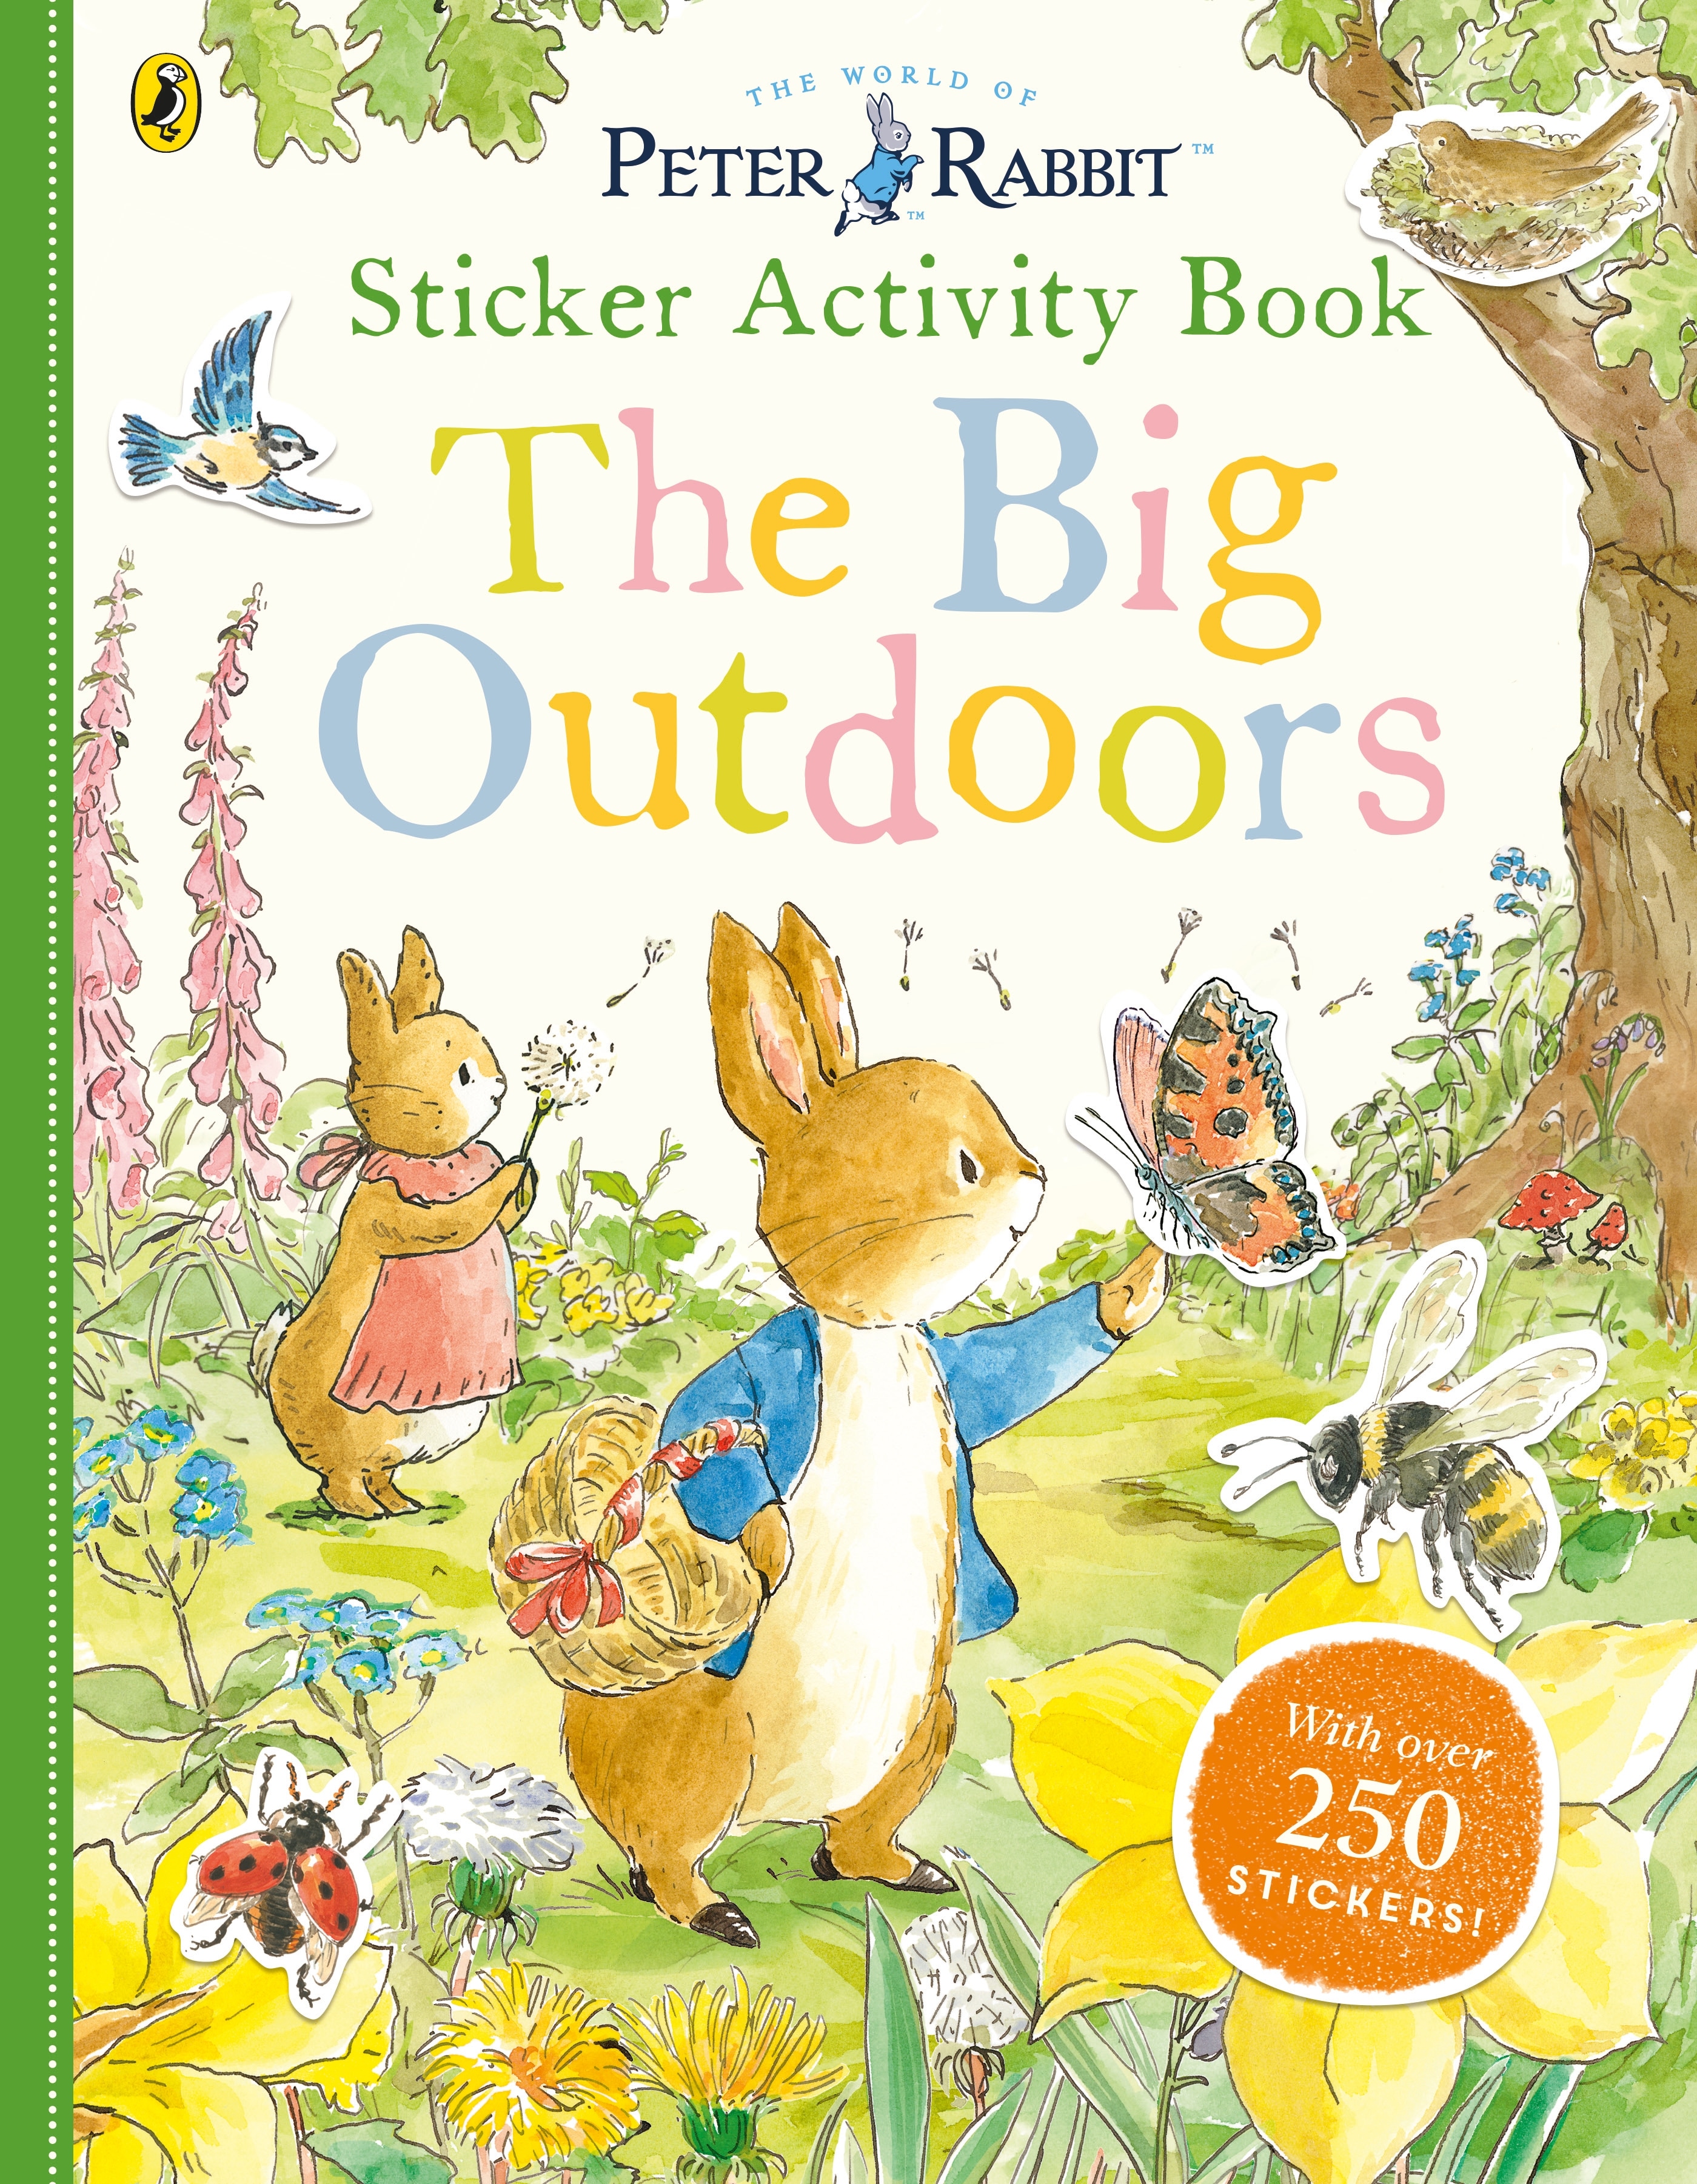 Book “Peter Rabbit The Big Outdoors Sticker Activity Book” by Beatrix Potter — May 12, 2022